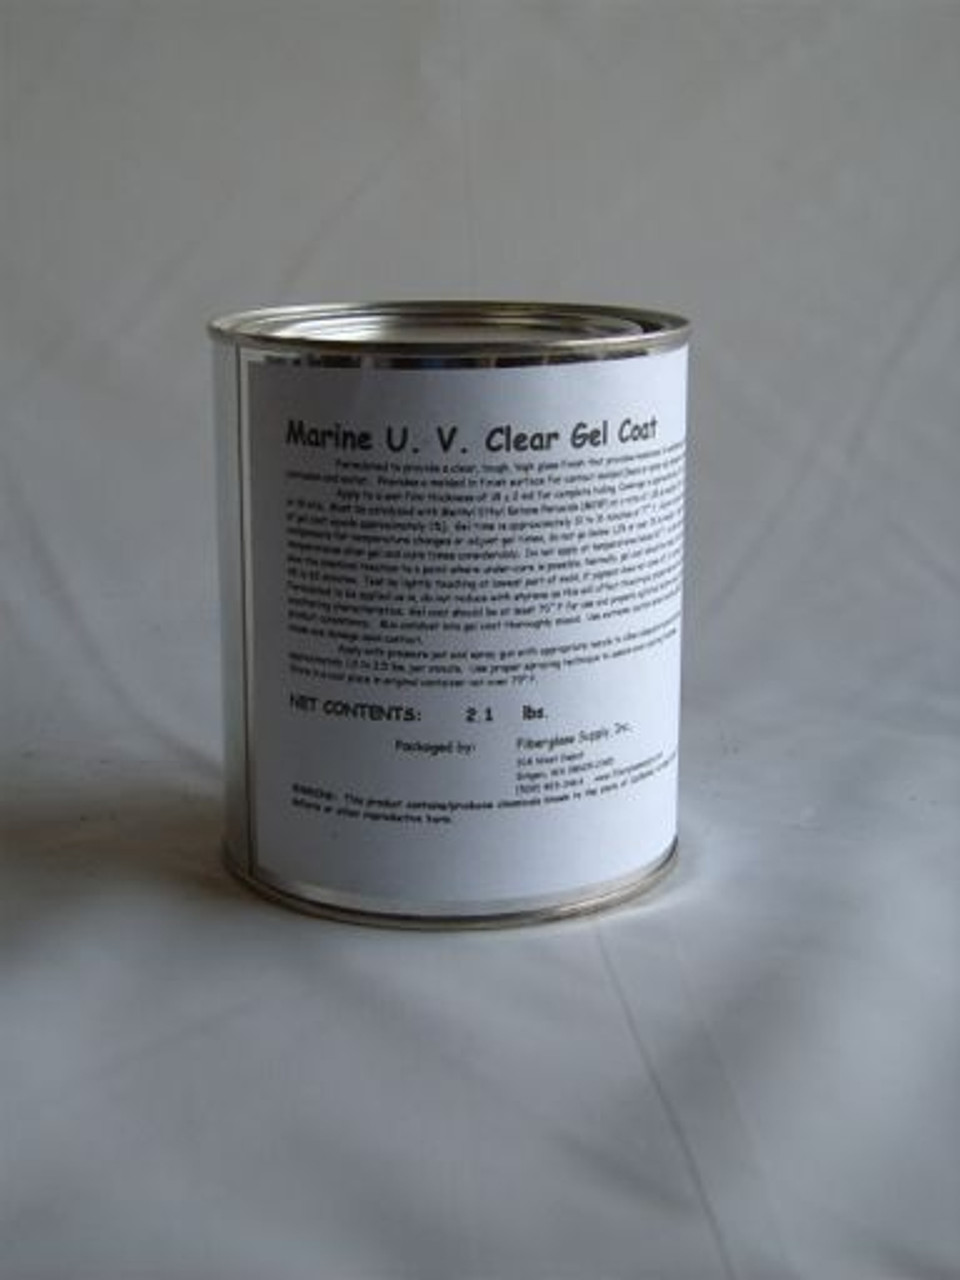 Black Pigment for Epoxy Resin, Gelcoat, Paint - 4 oz